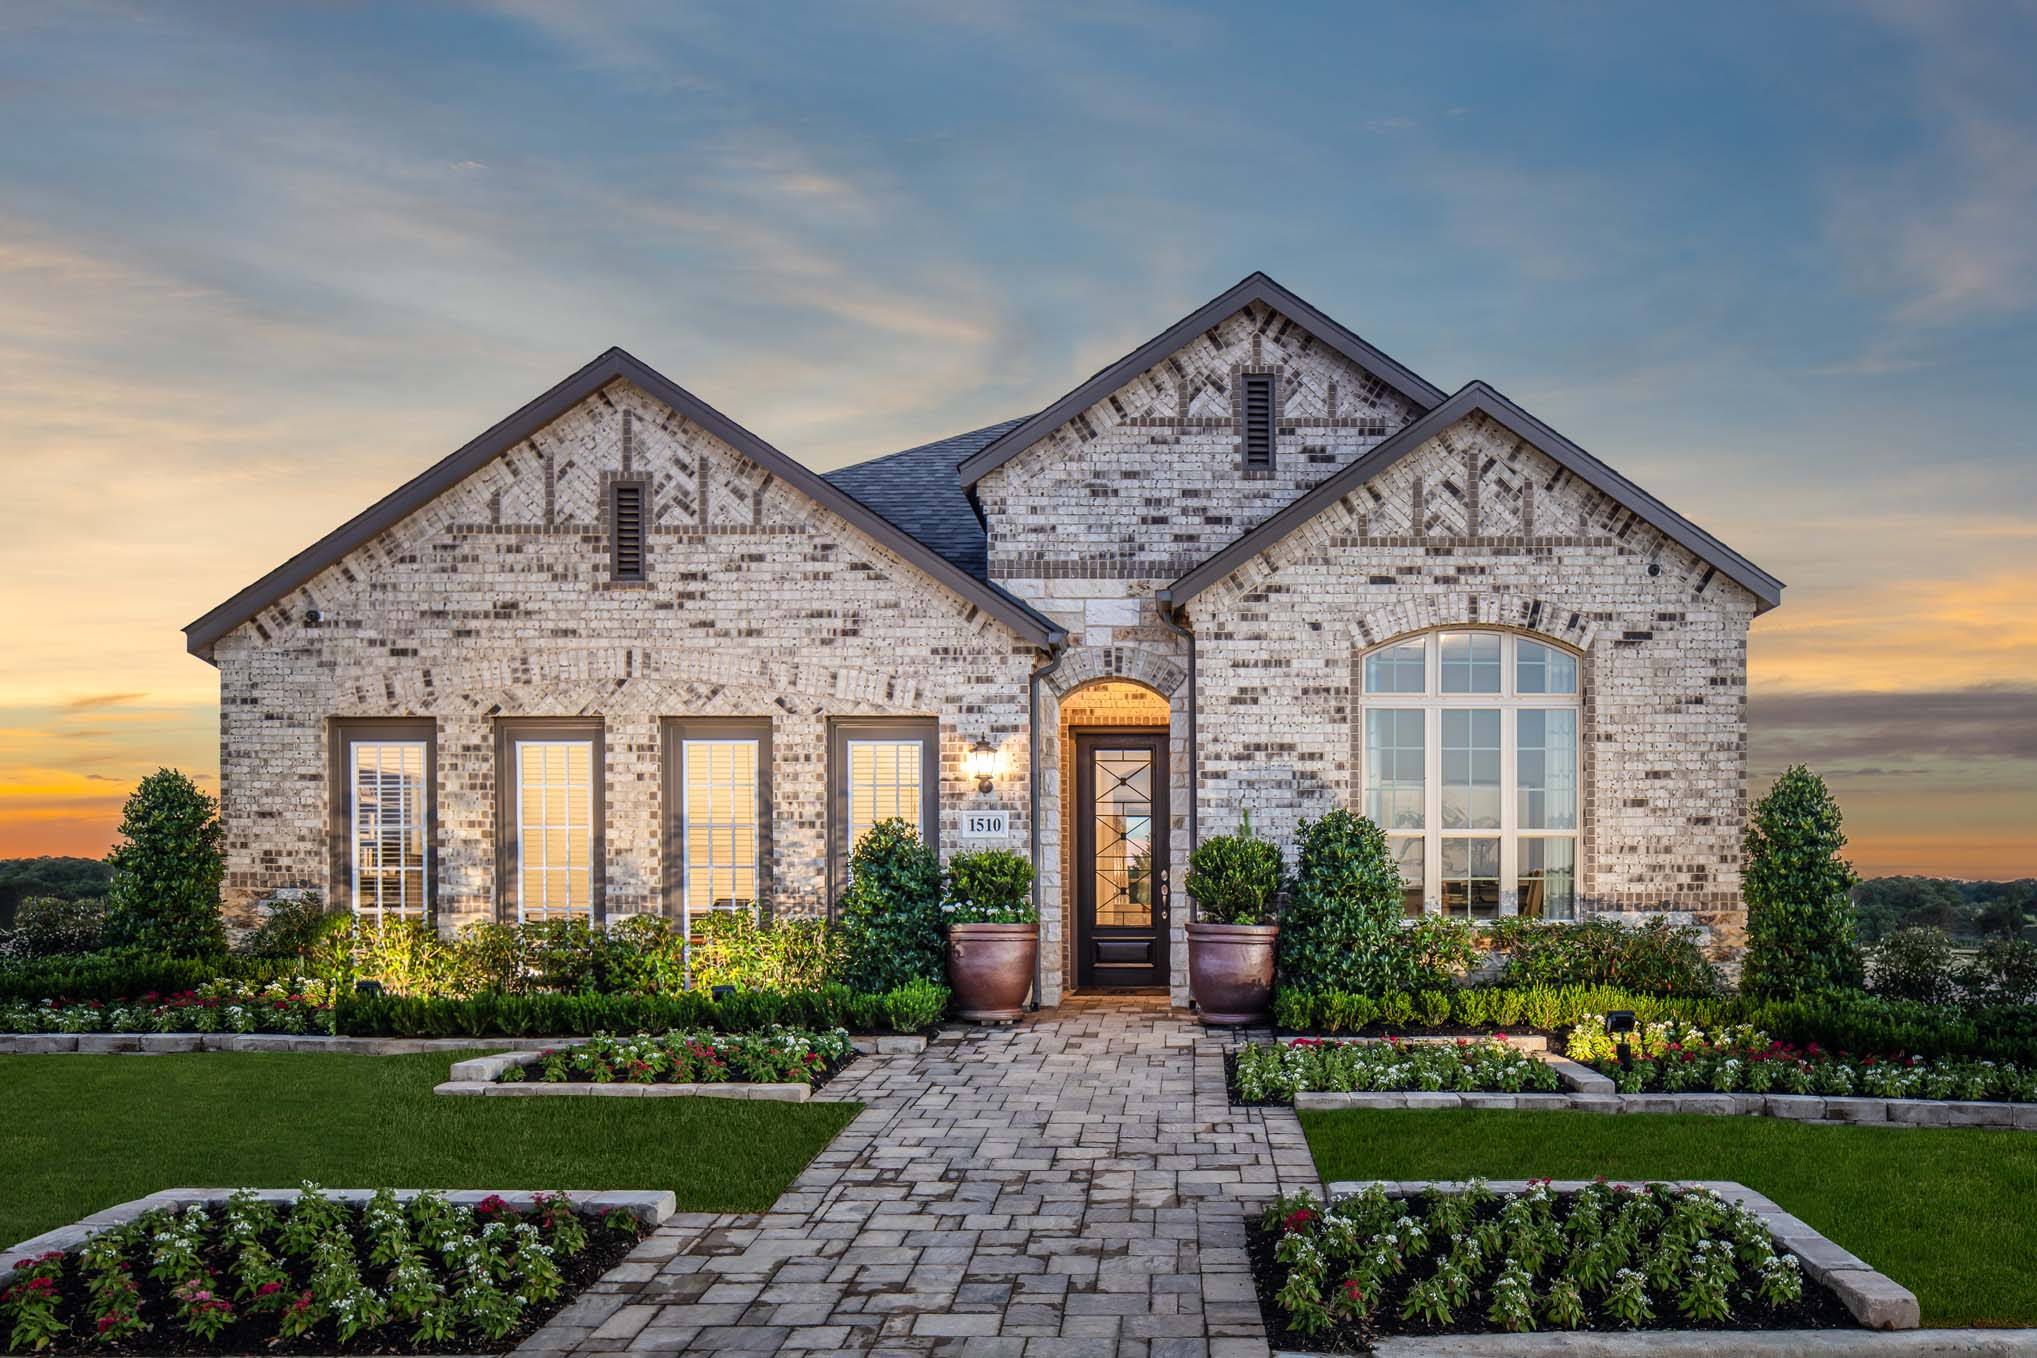 Exterior shot of Meyer Ranch custom home with natural stone facade and manicured garden against sunset backdrop